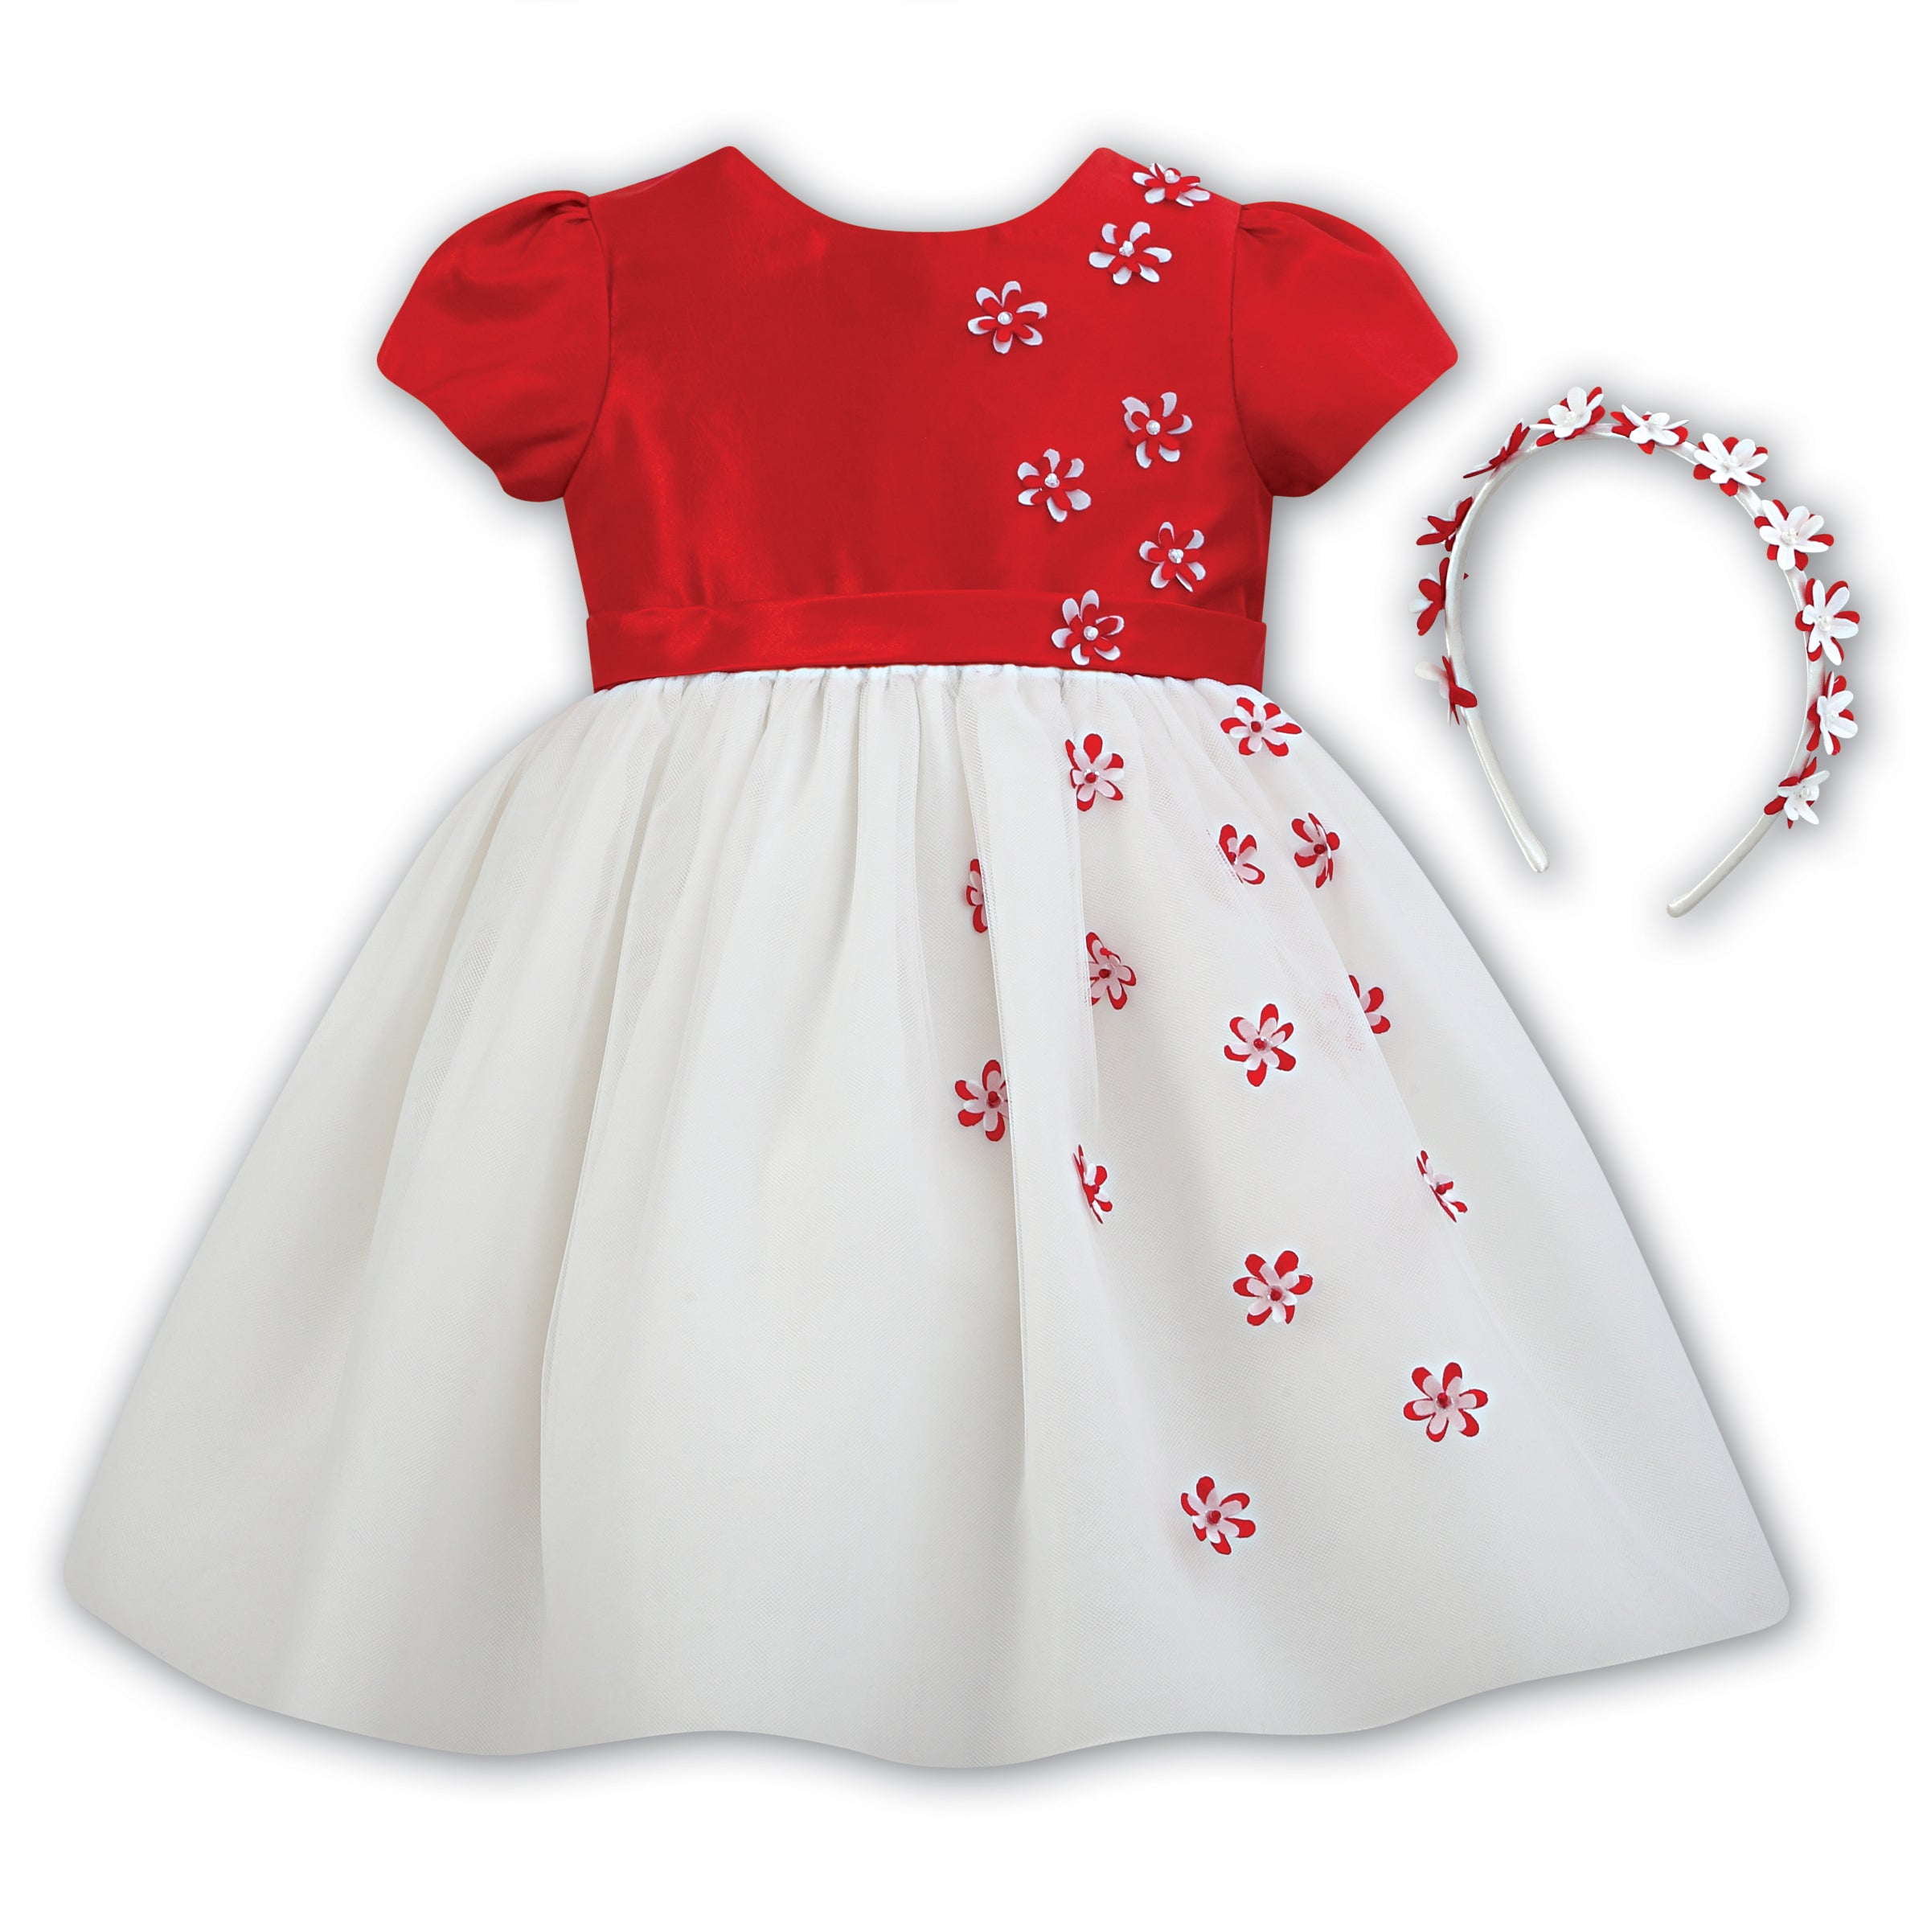 baby red party dress